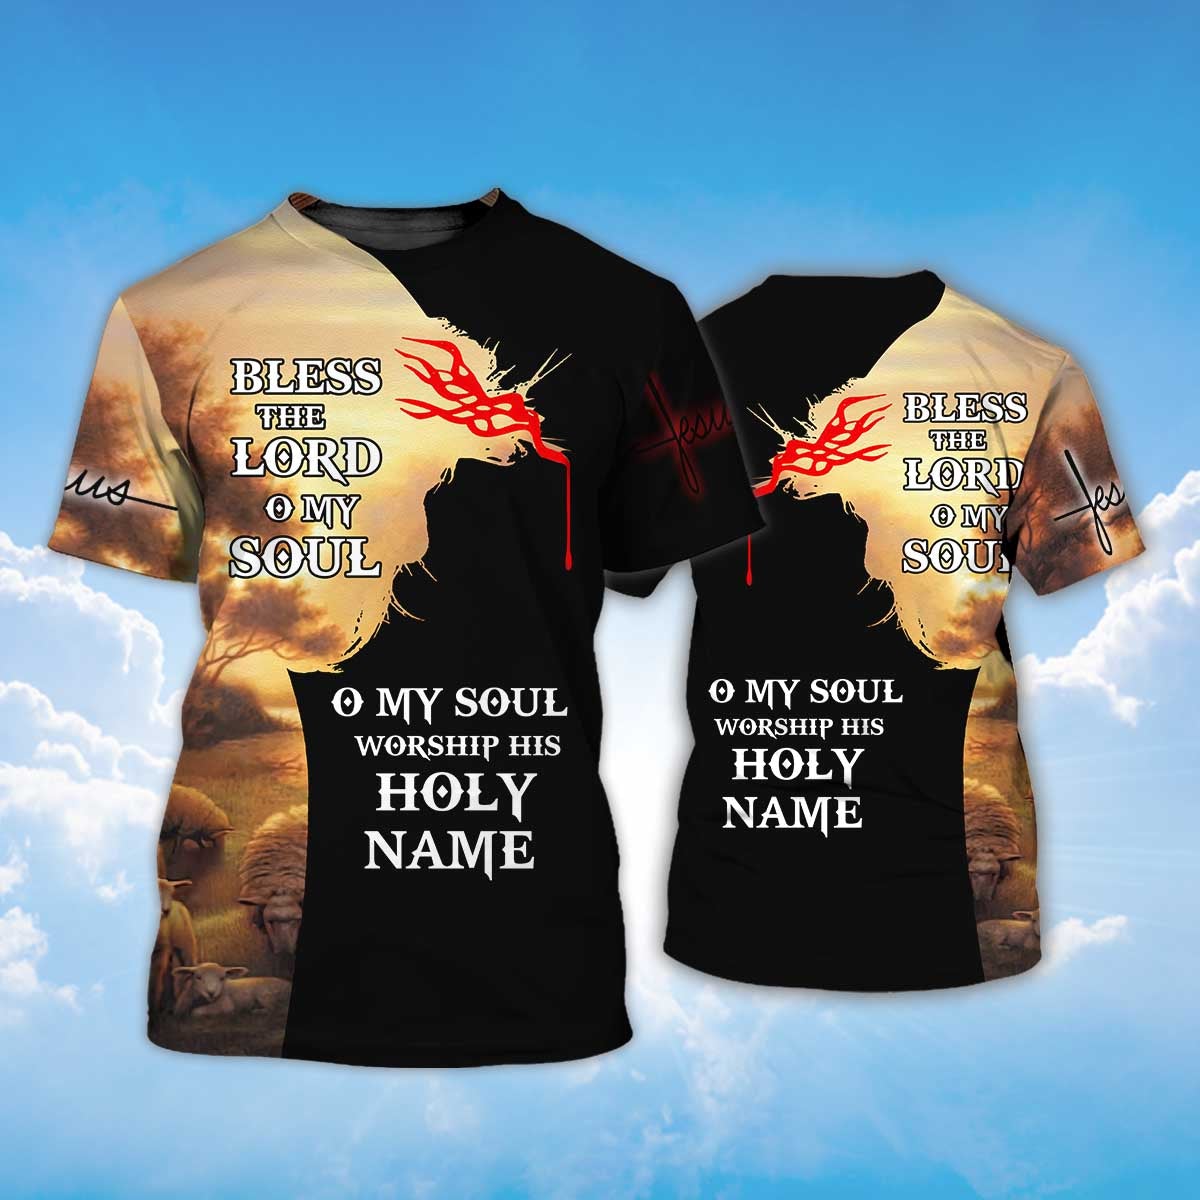 Bless The Lord O My Sould T Shirt Jesus Shirt For Men Women